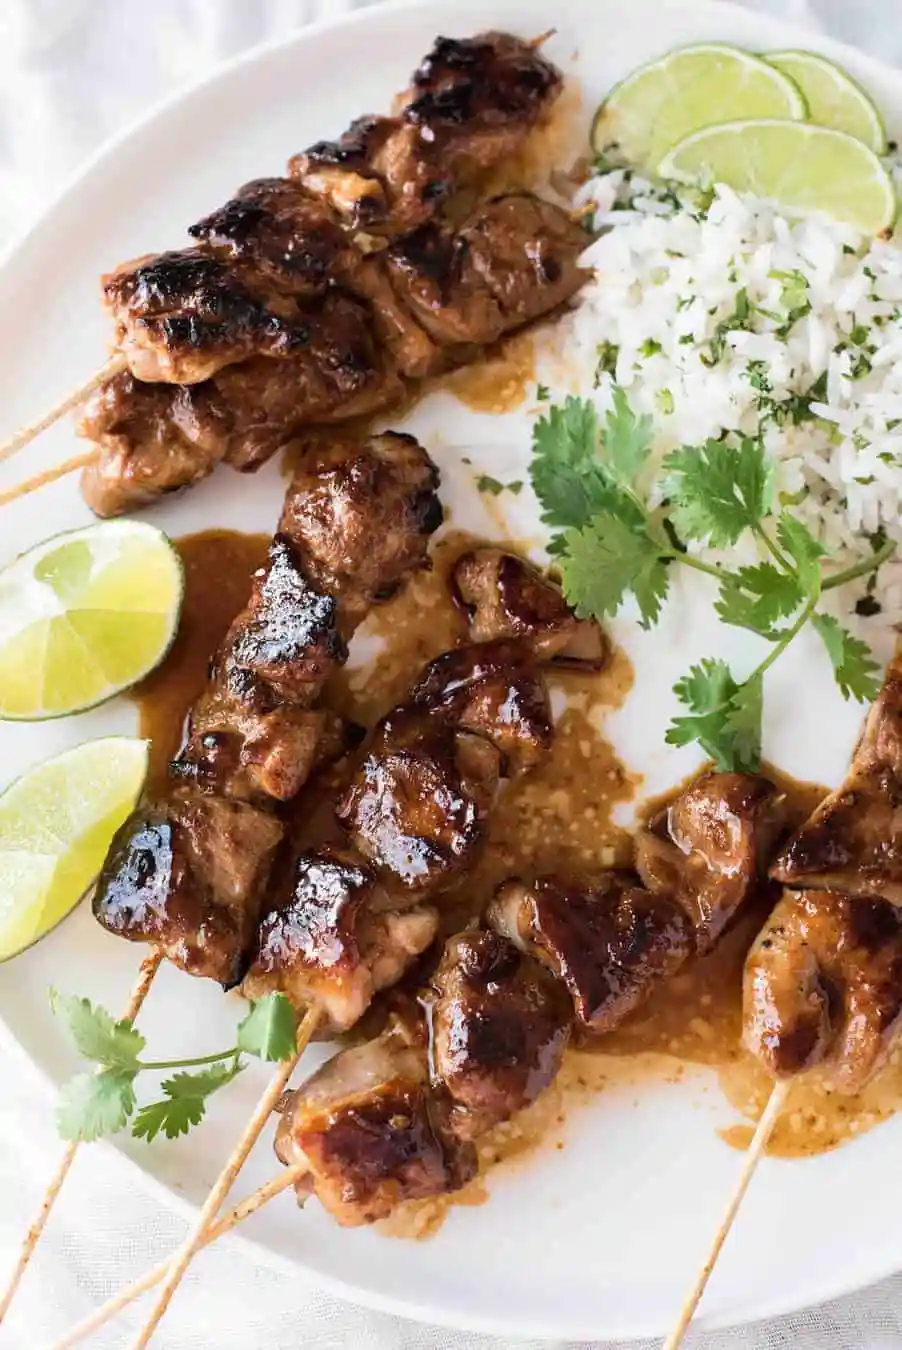 Three juicy grilled chicken skewers served with cilantro-lime rice and lime wedges on a white plate, ready to delight the taste buds.